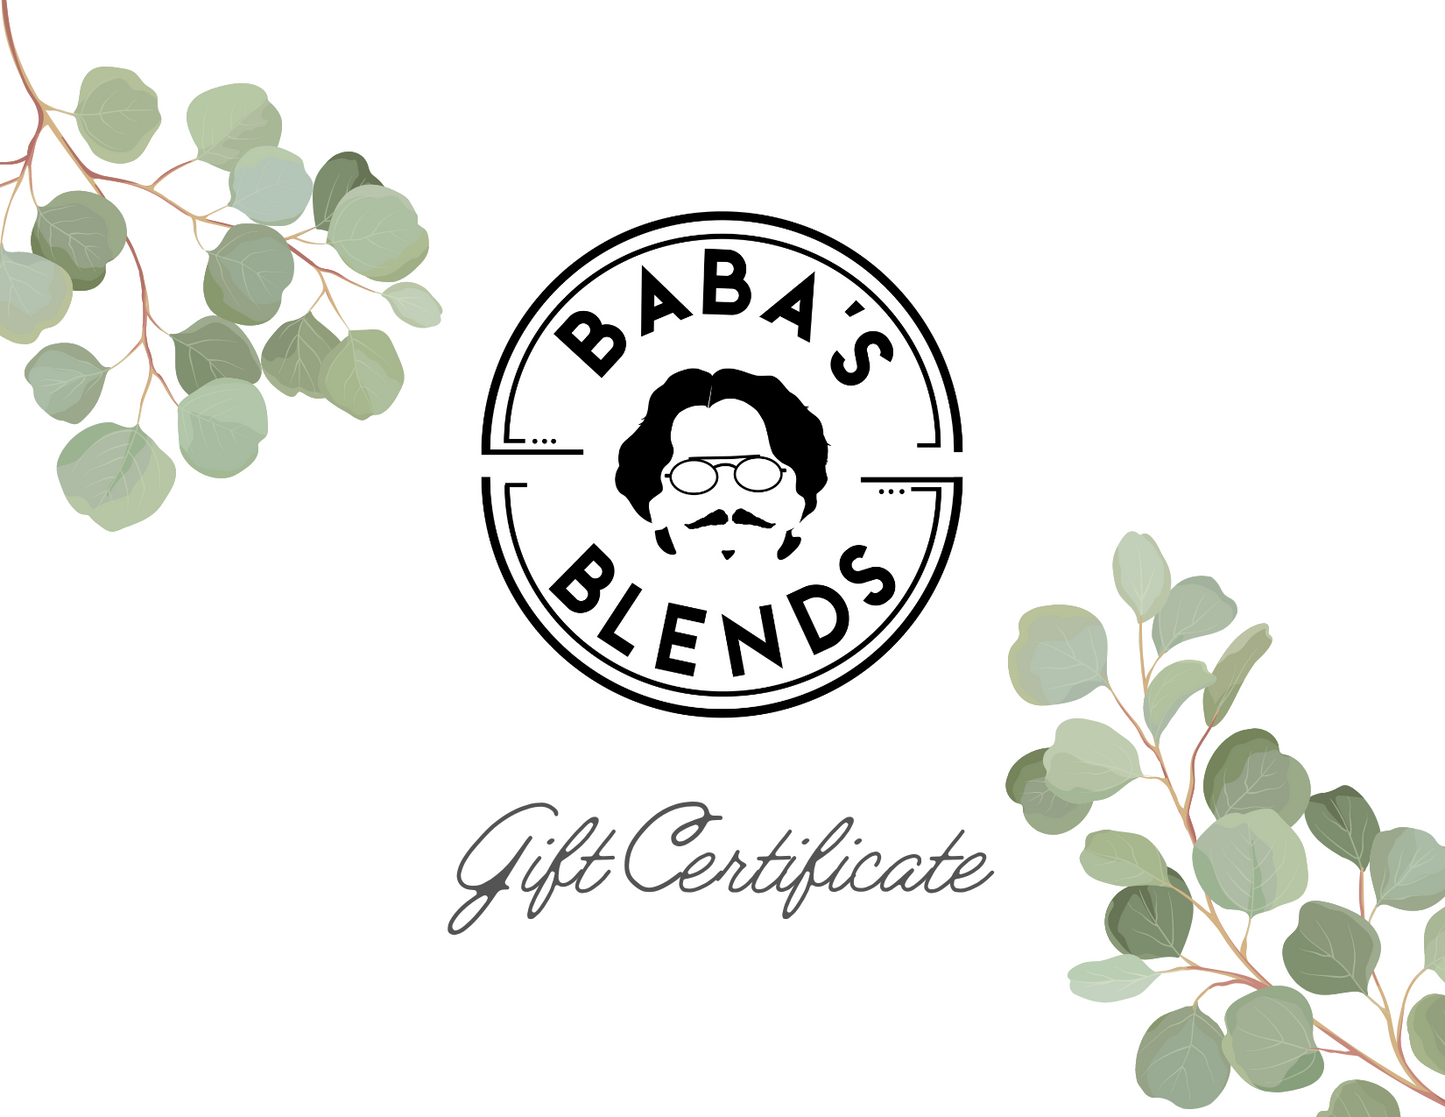 Baba's Blends Gift Cards